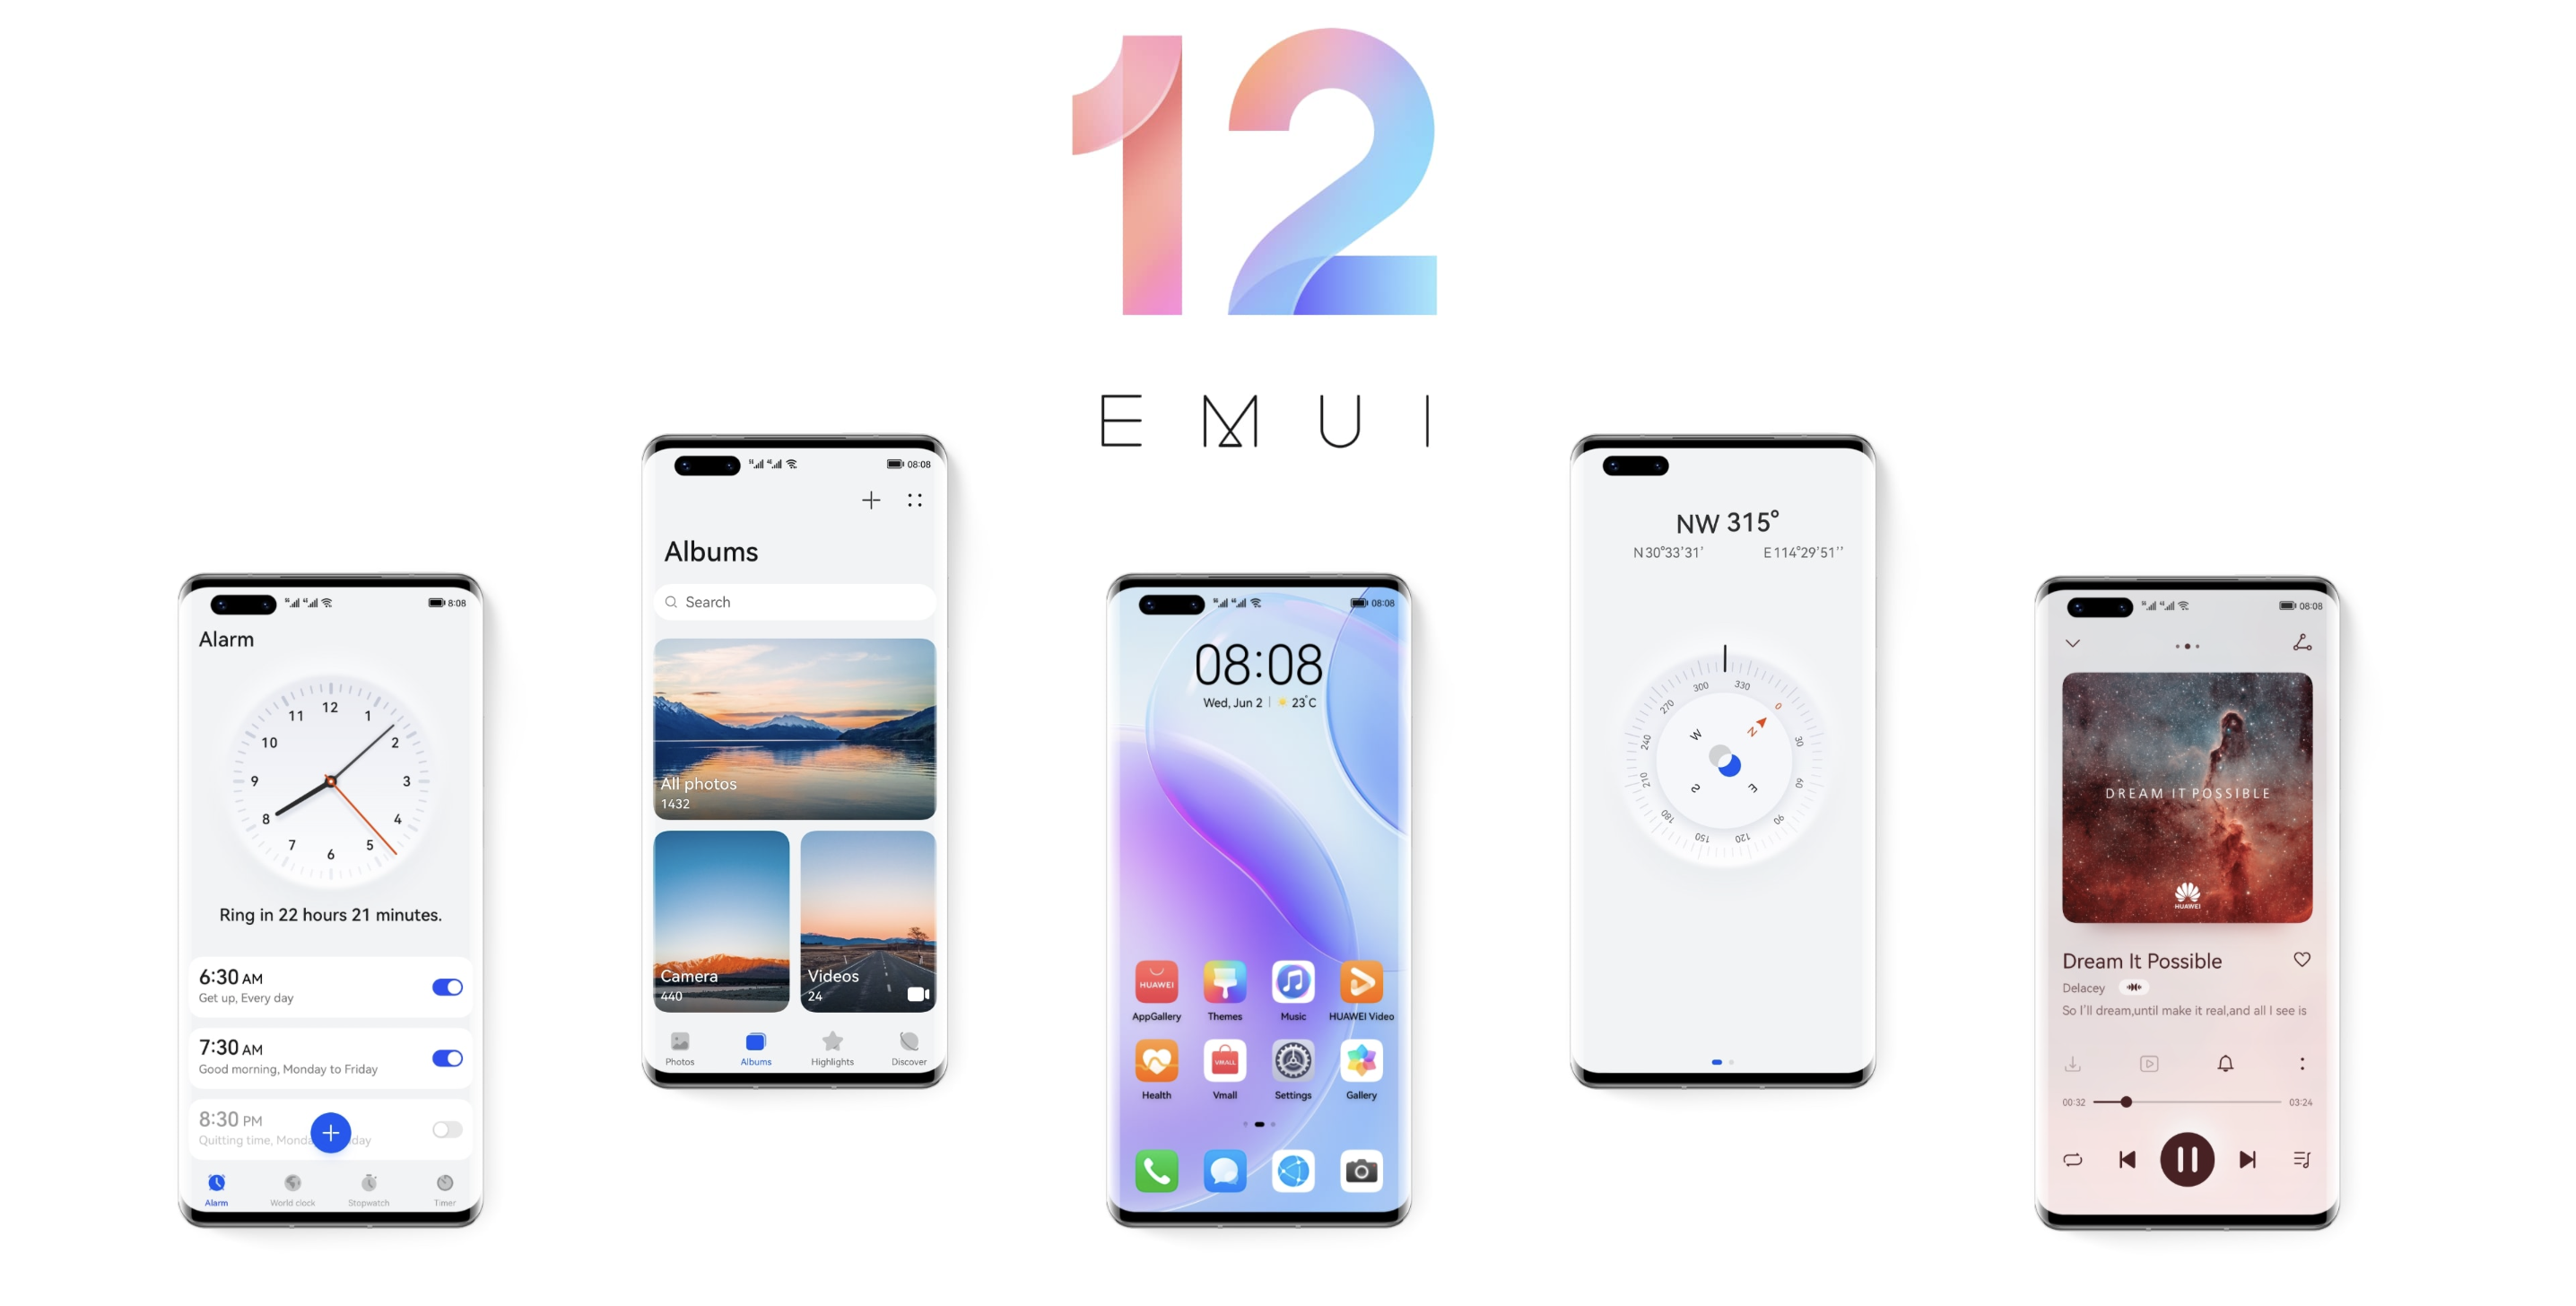 Huawei launched EMUI 12 testing - how to participate